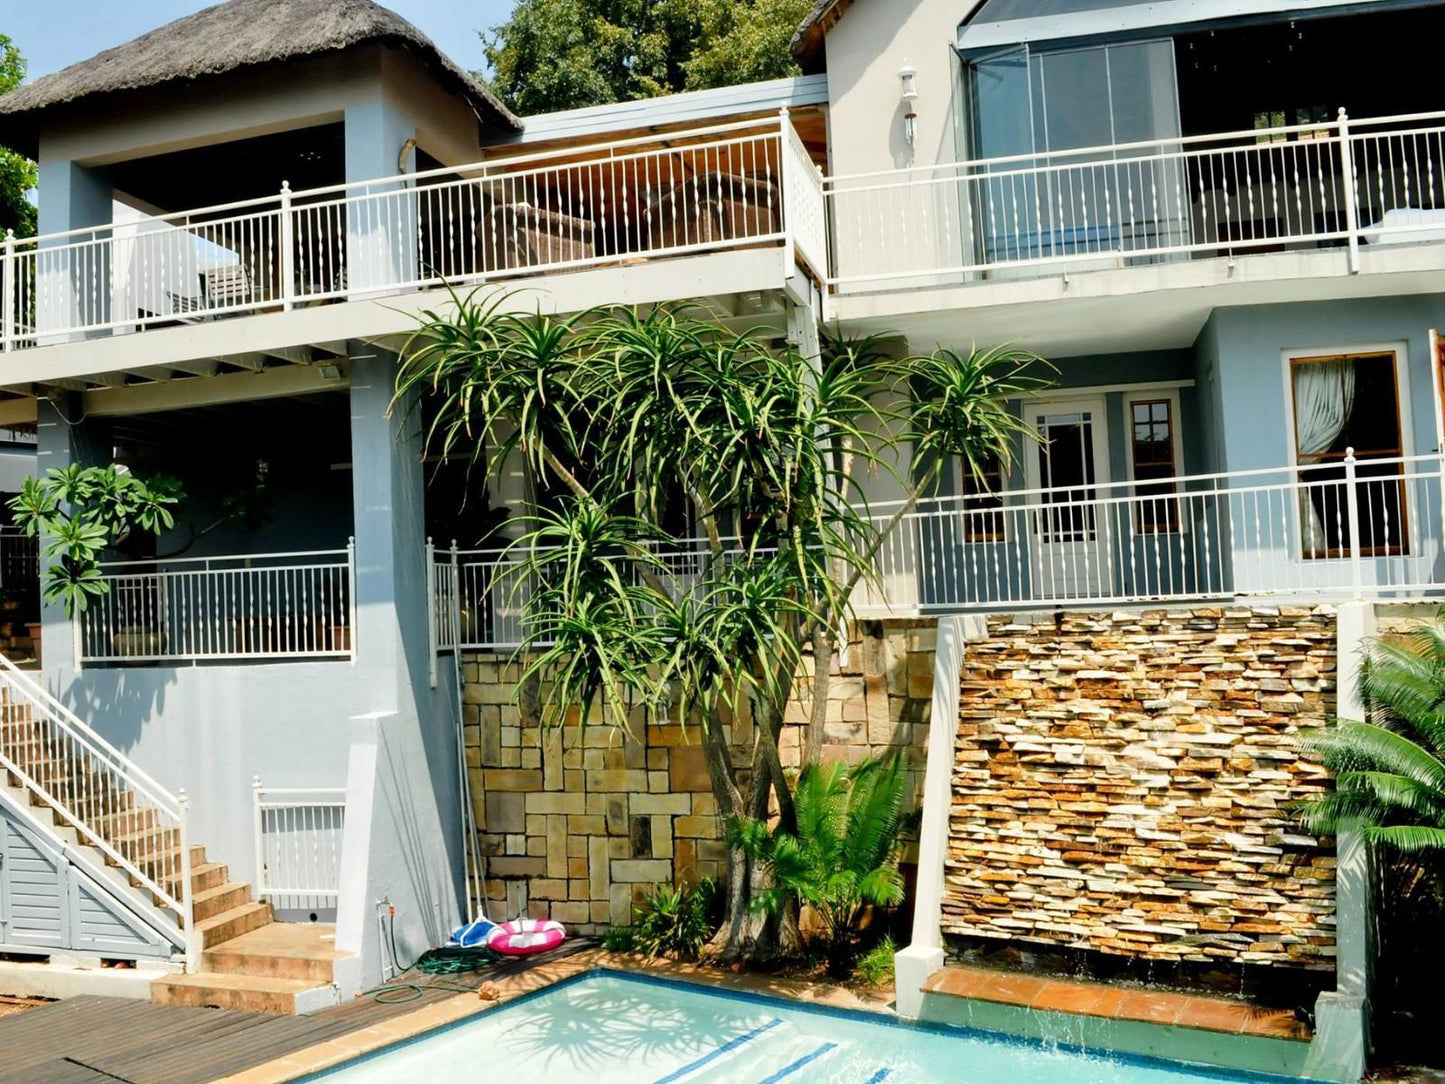 Fever Tree Manor Kosmos Hartbeespoort North West Province South Africa House, Building, Architecture, Palm Tree, Plant, Nature, Wood, Swimming Pool